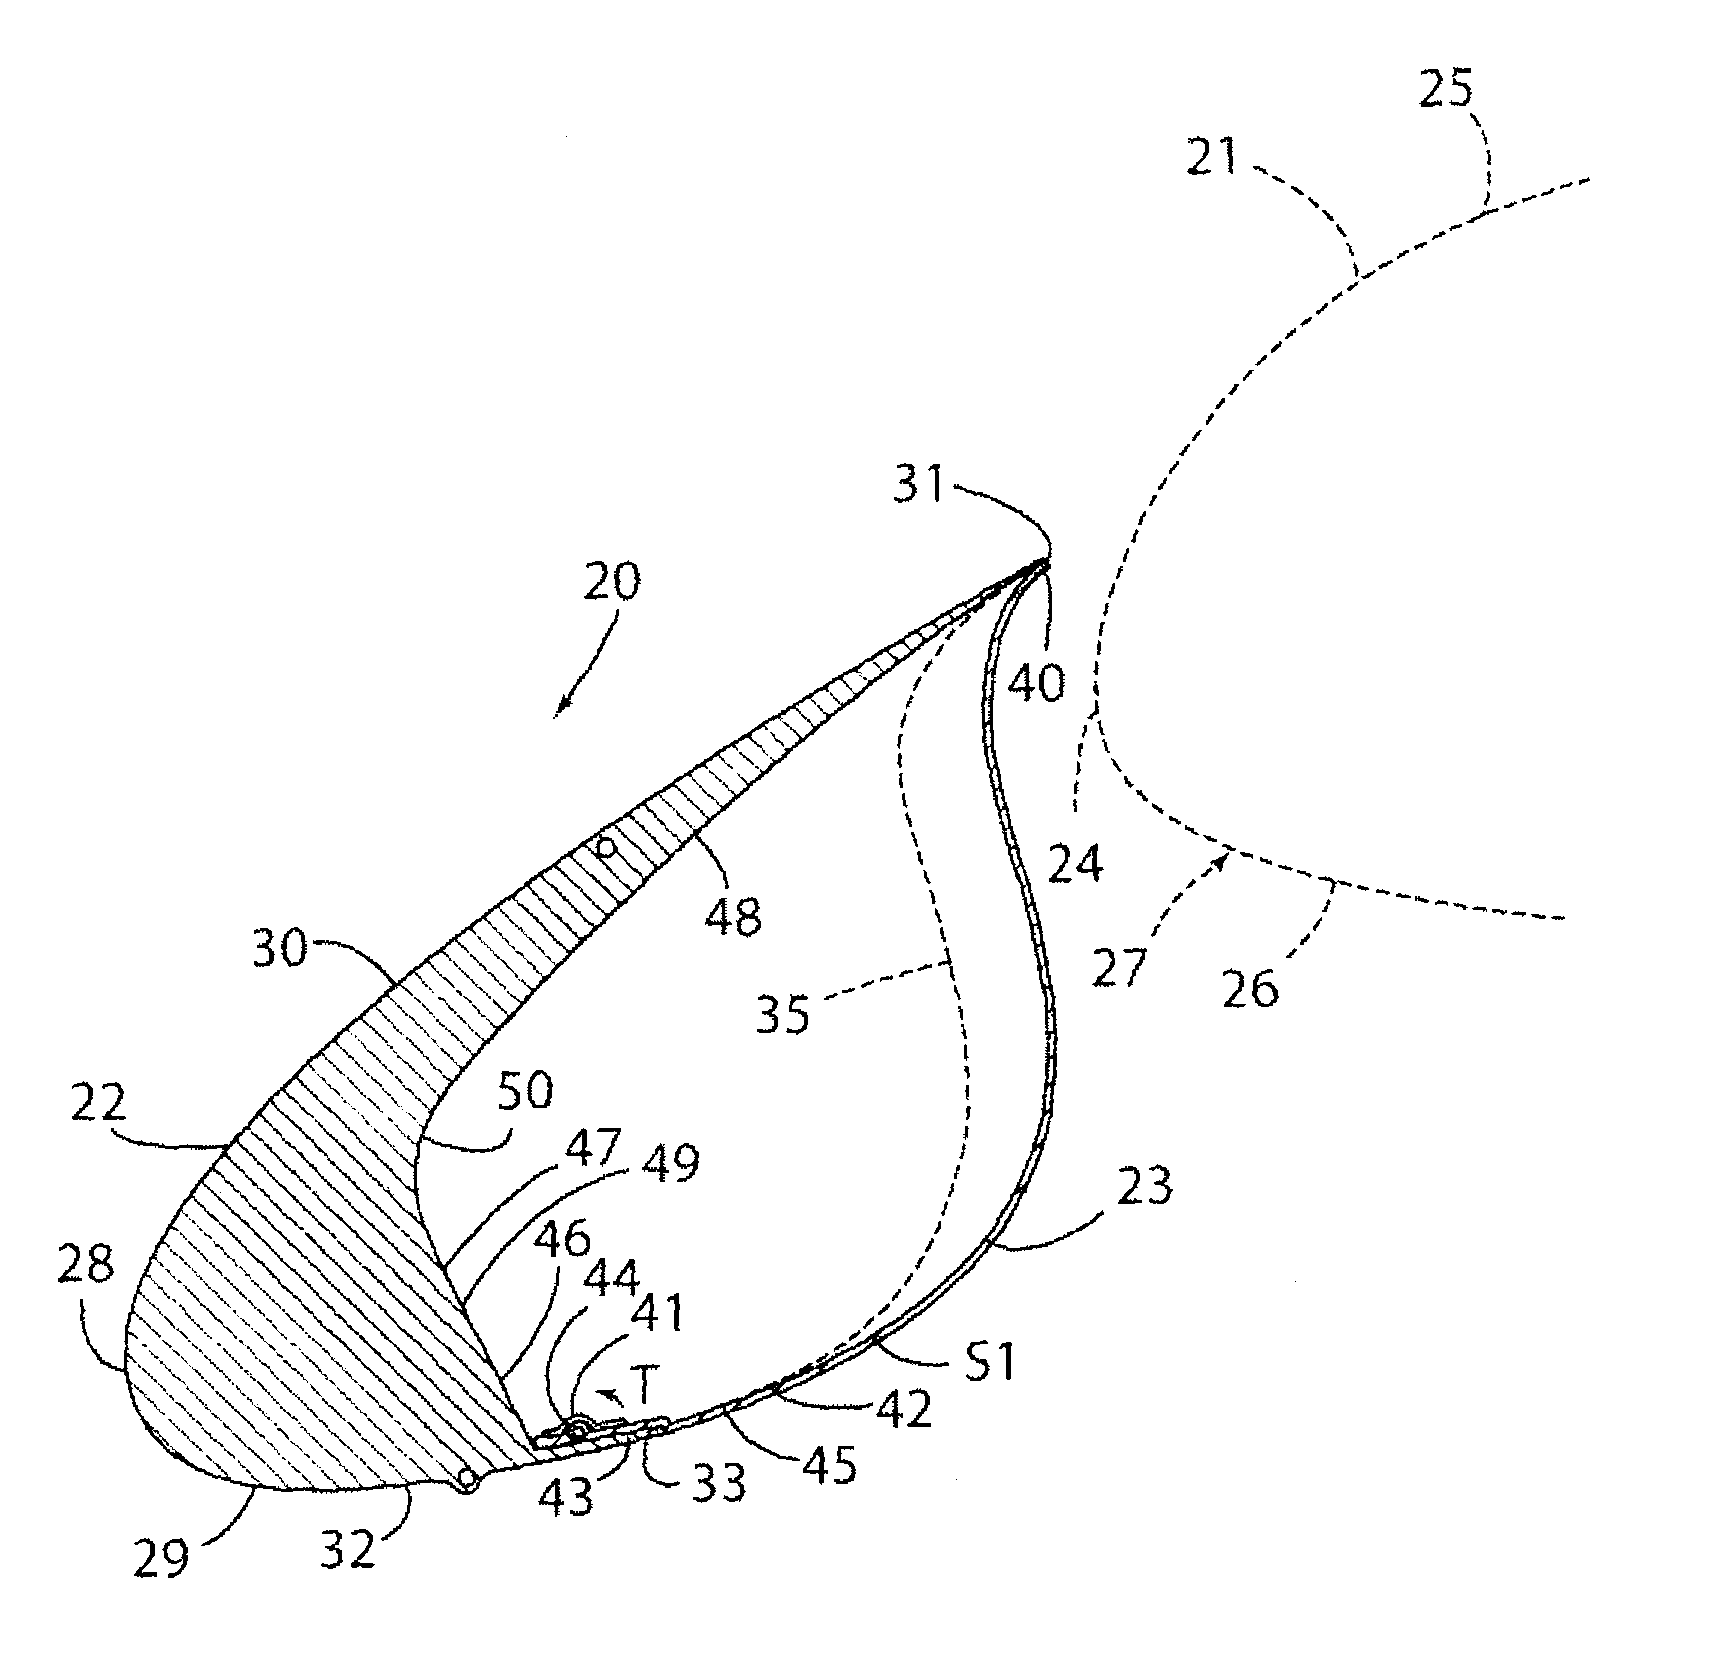 Autonomous slat-cove-filler device for reduction of aeroacoustic noise associated with aircraft systems